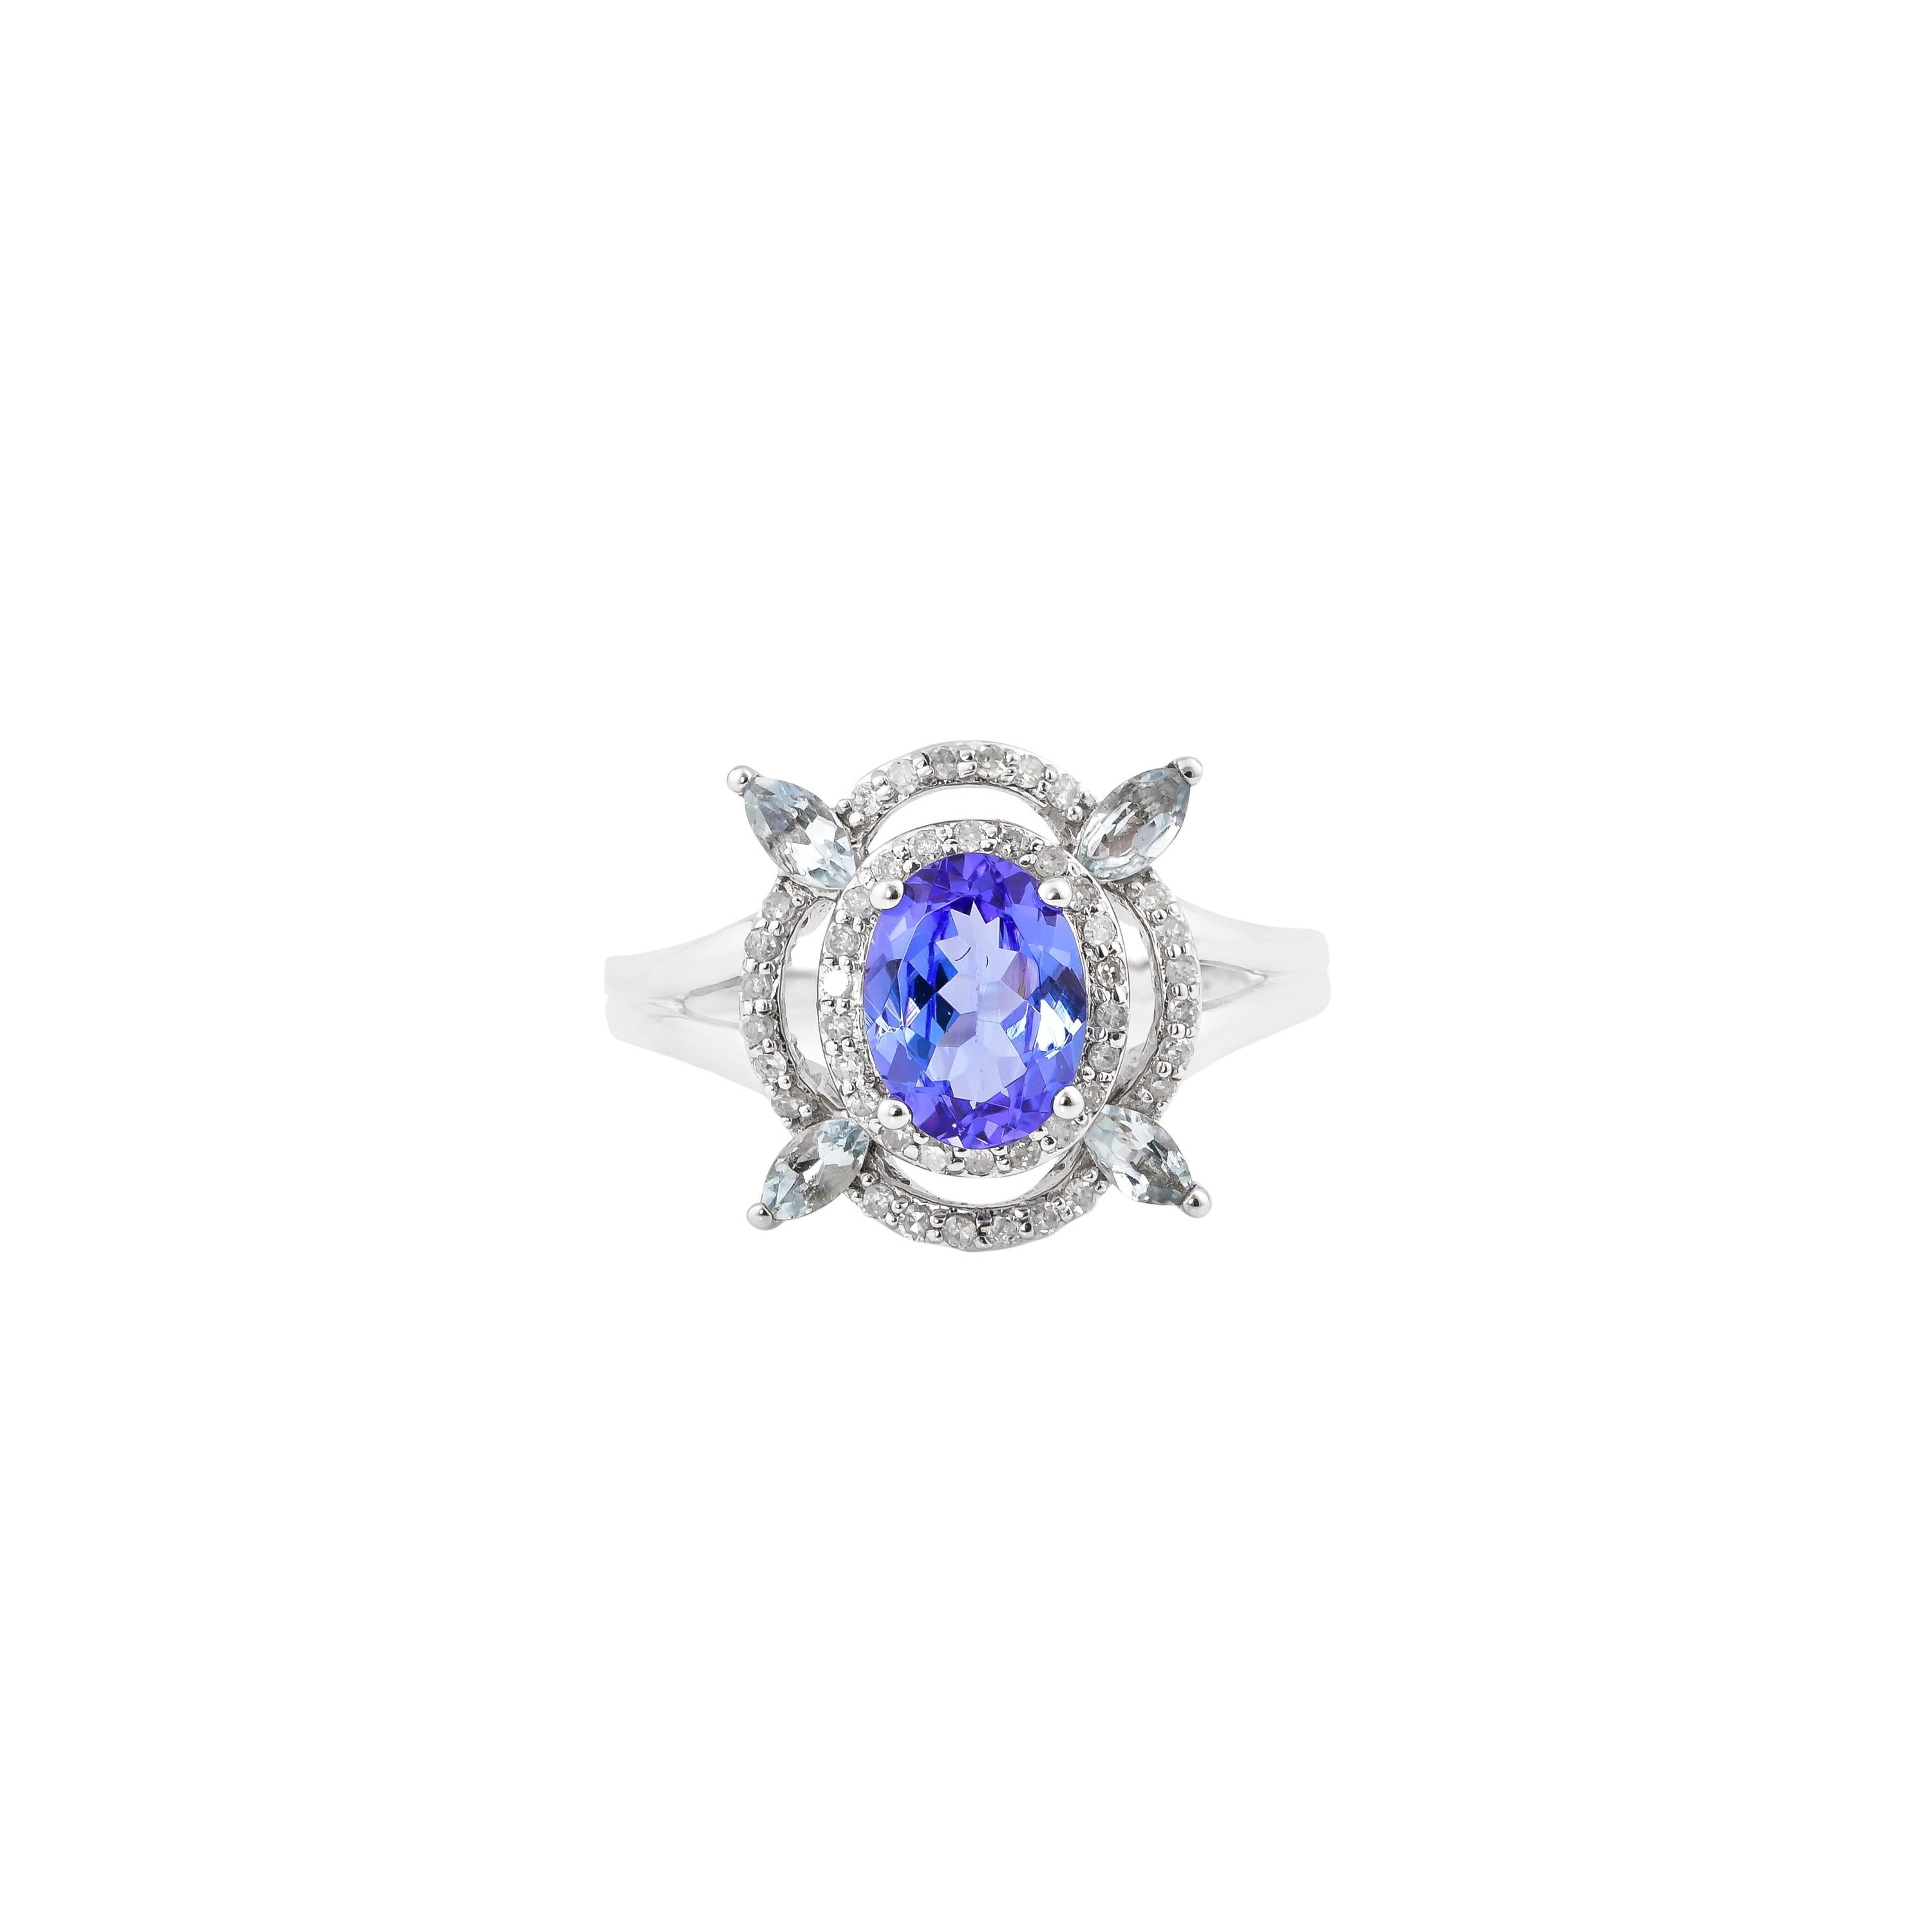 Contemporary 1.264 Carat Tanzanite Ring in 10 Karat White Gold with Aquamarine and Diamond. For Sale